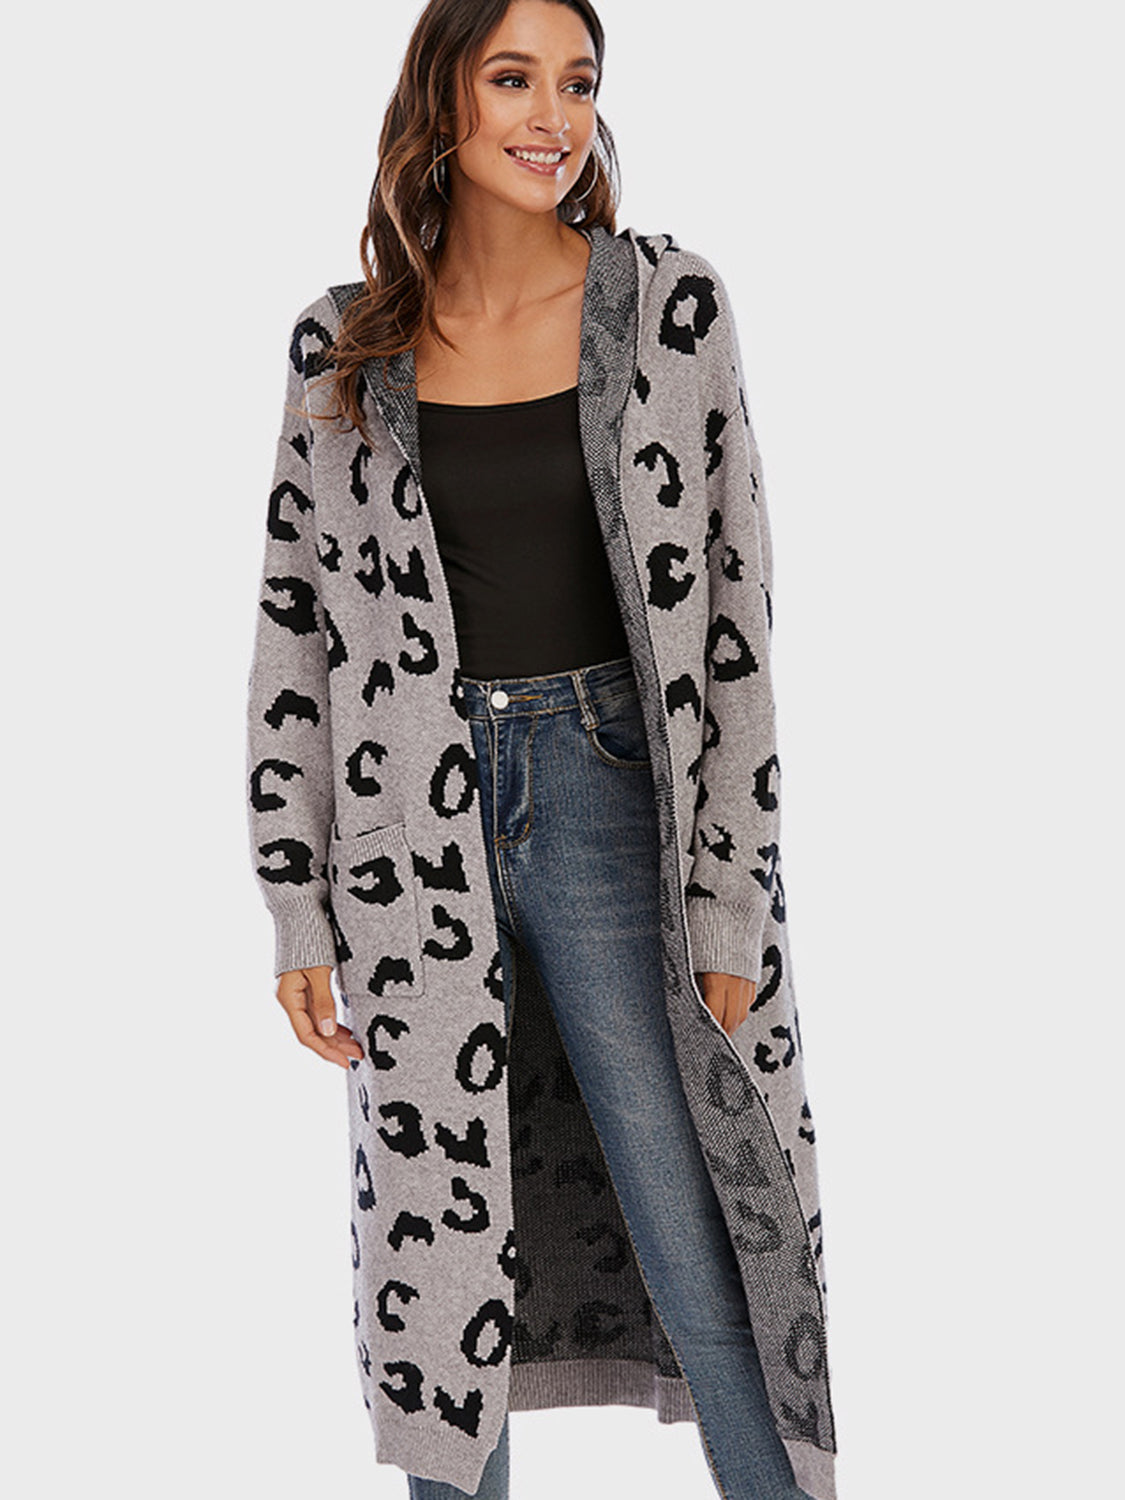 Leopard Hooded Cardigan with Pockets - Women’s Clothing & Accessories - Shirts & Tops - 5 - 2024